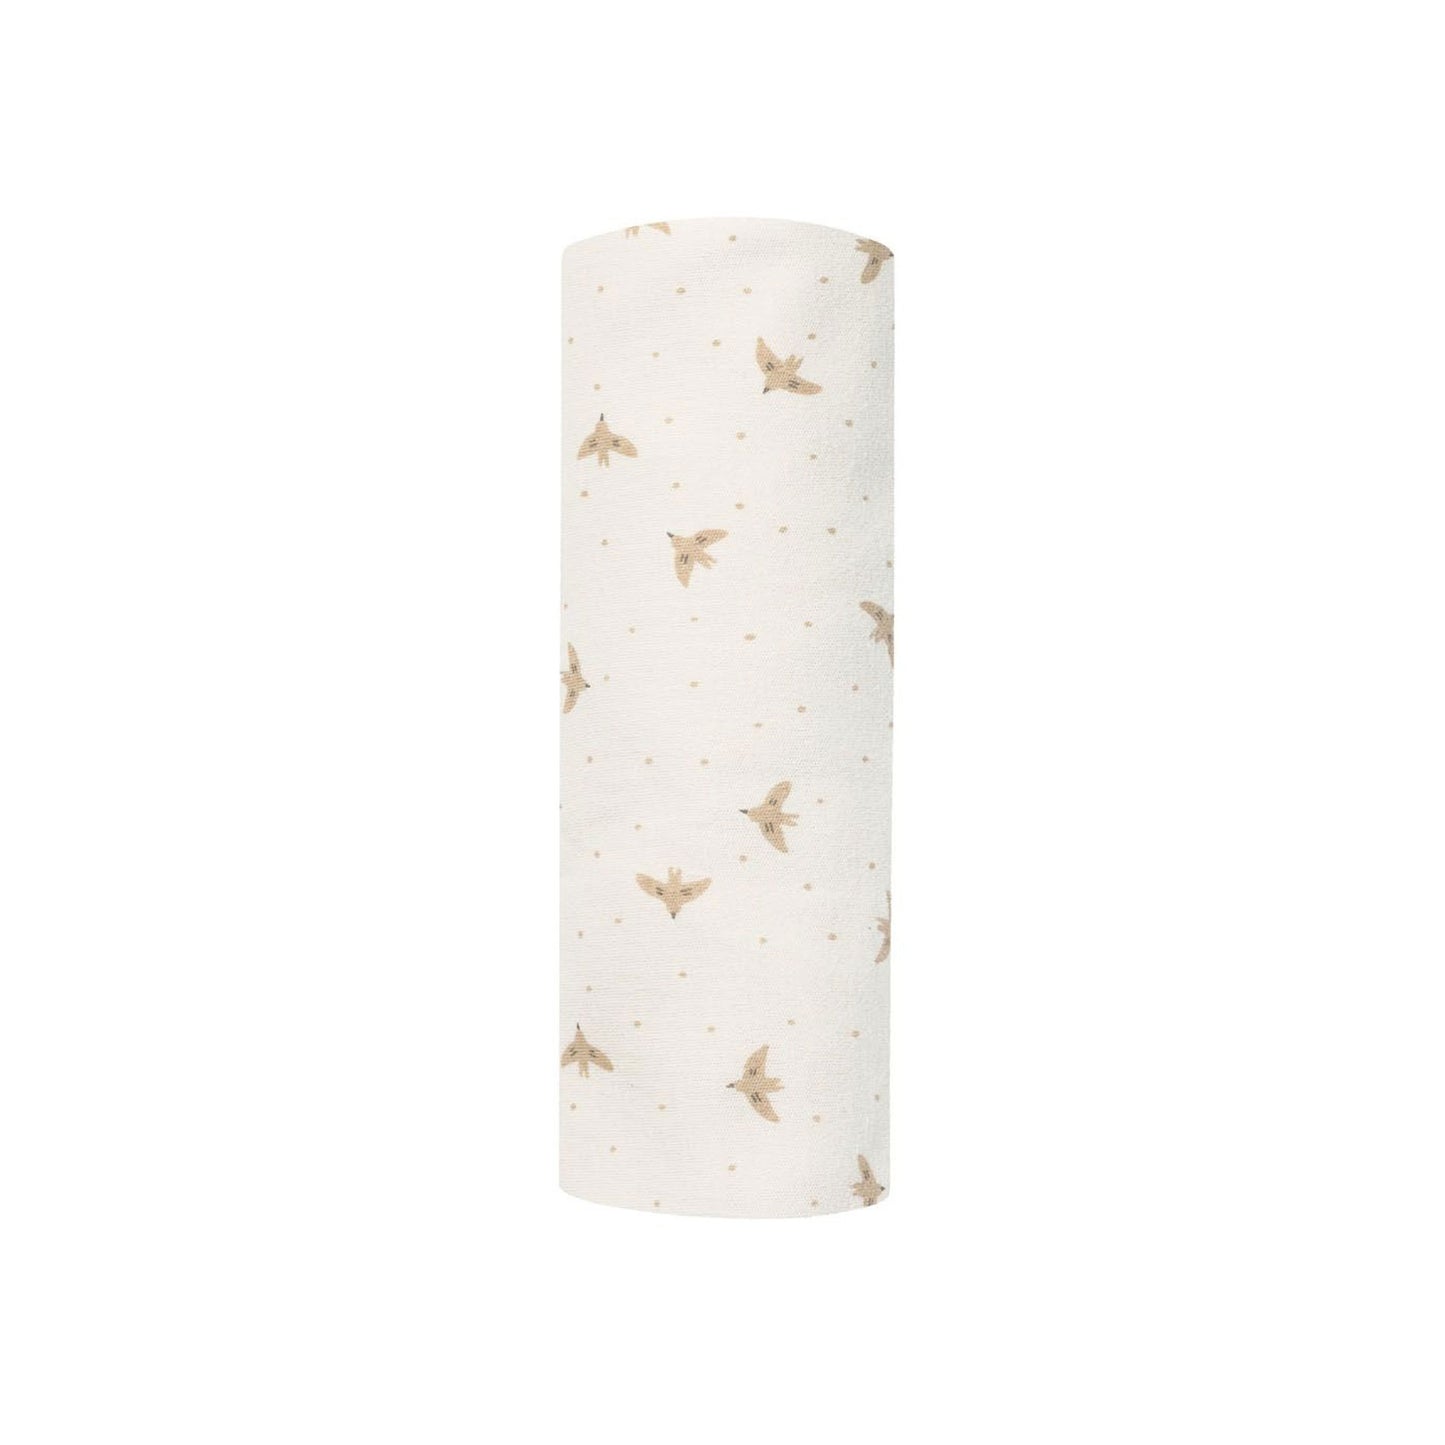 Quincy Mae Baby Swaddle Blanket - Doves - Ivory